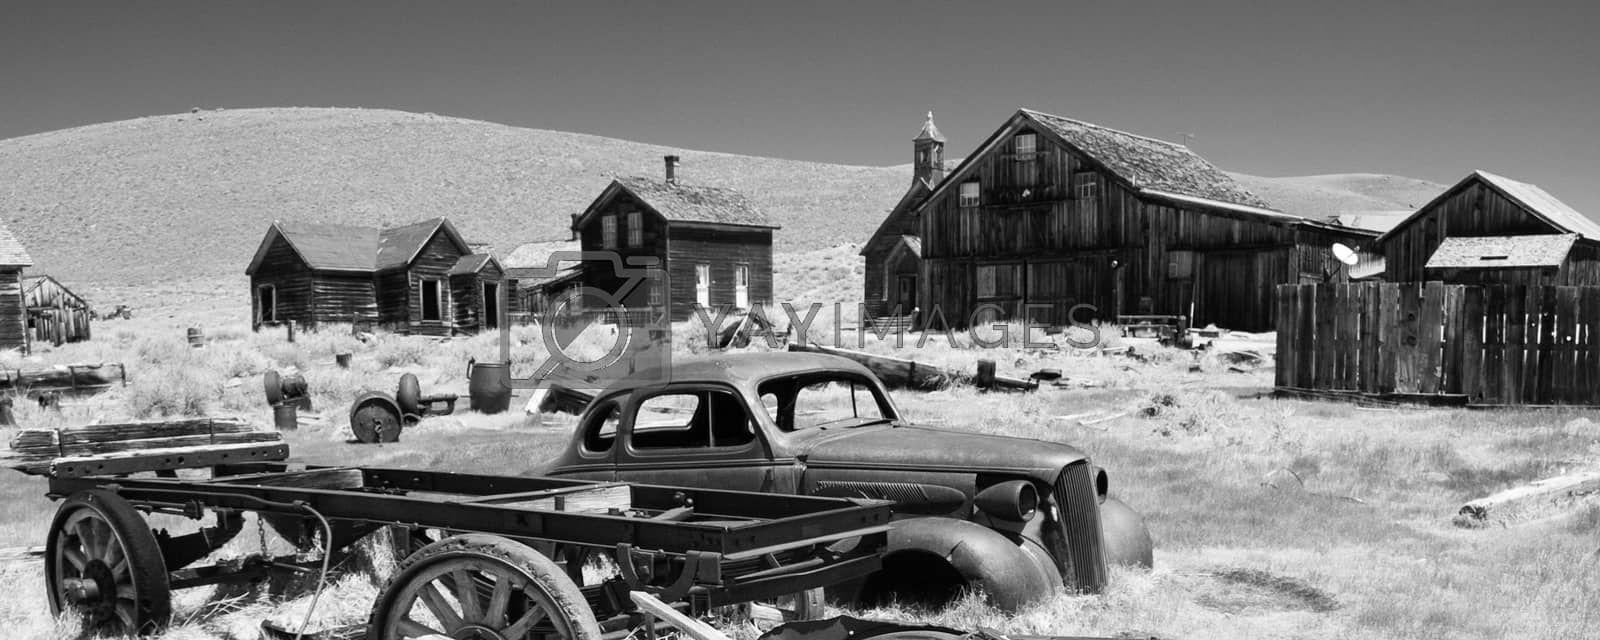 Royalty free image of Bodie State Historic Park by CelsoDiniz